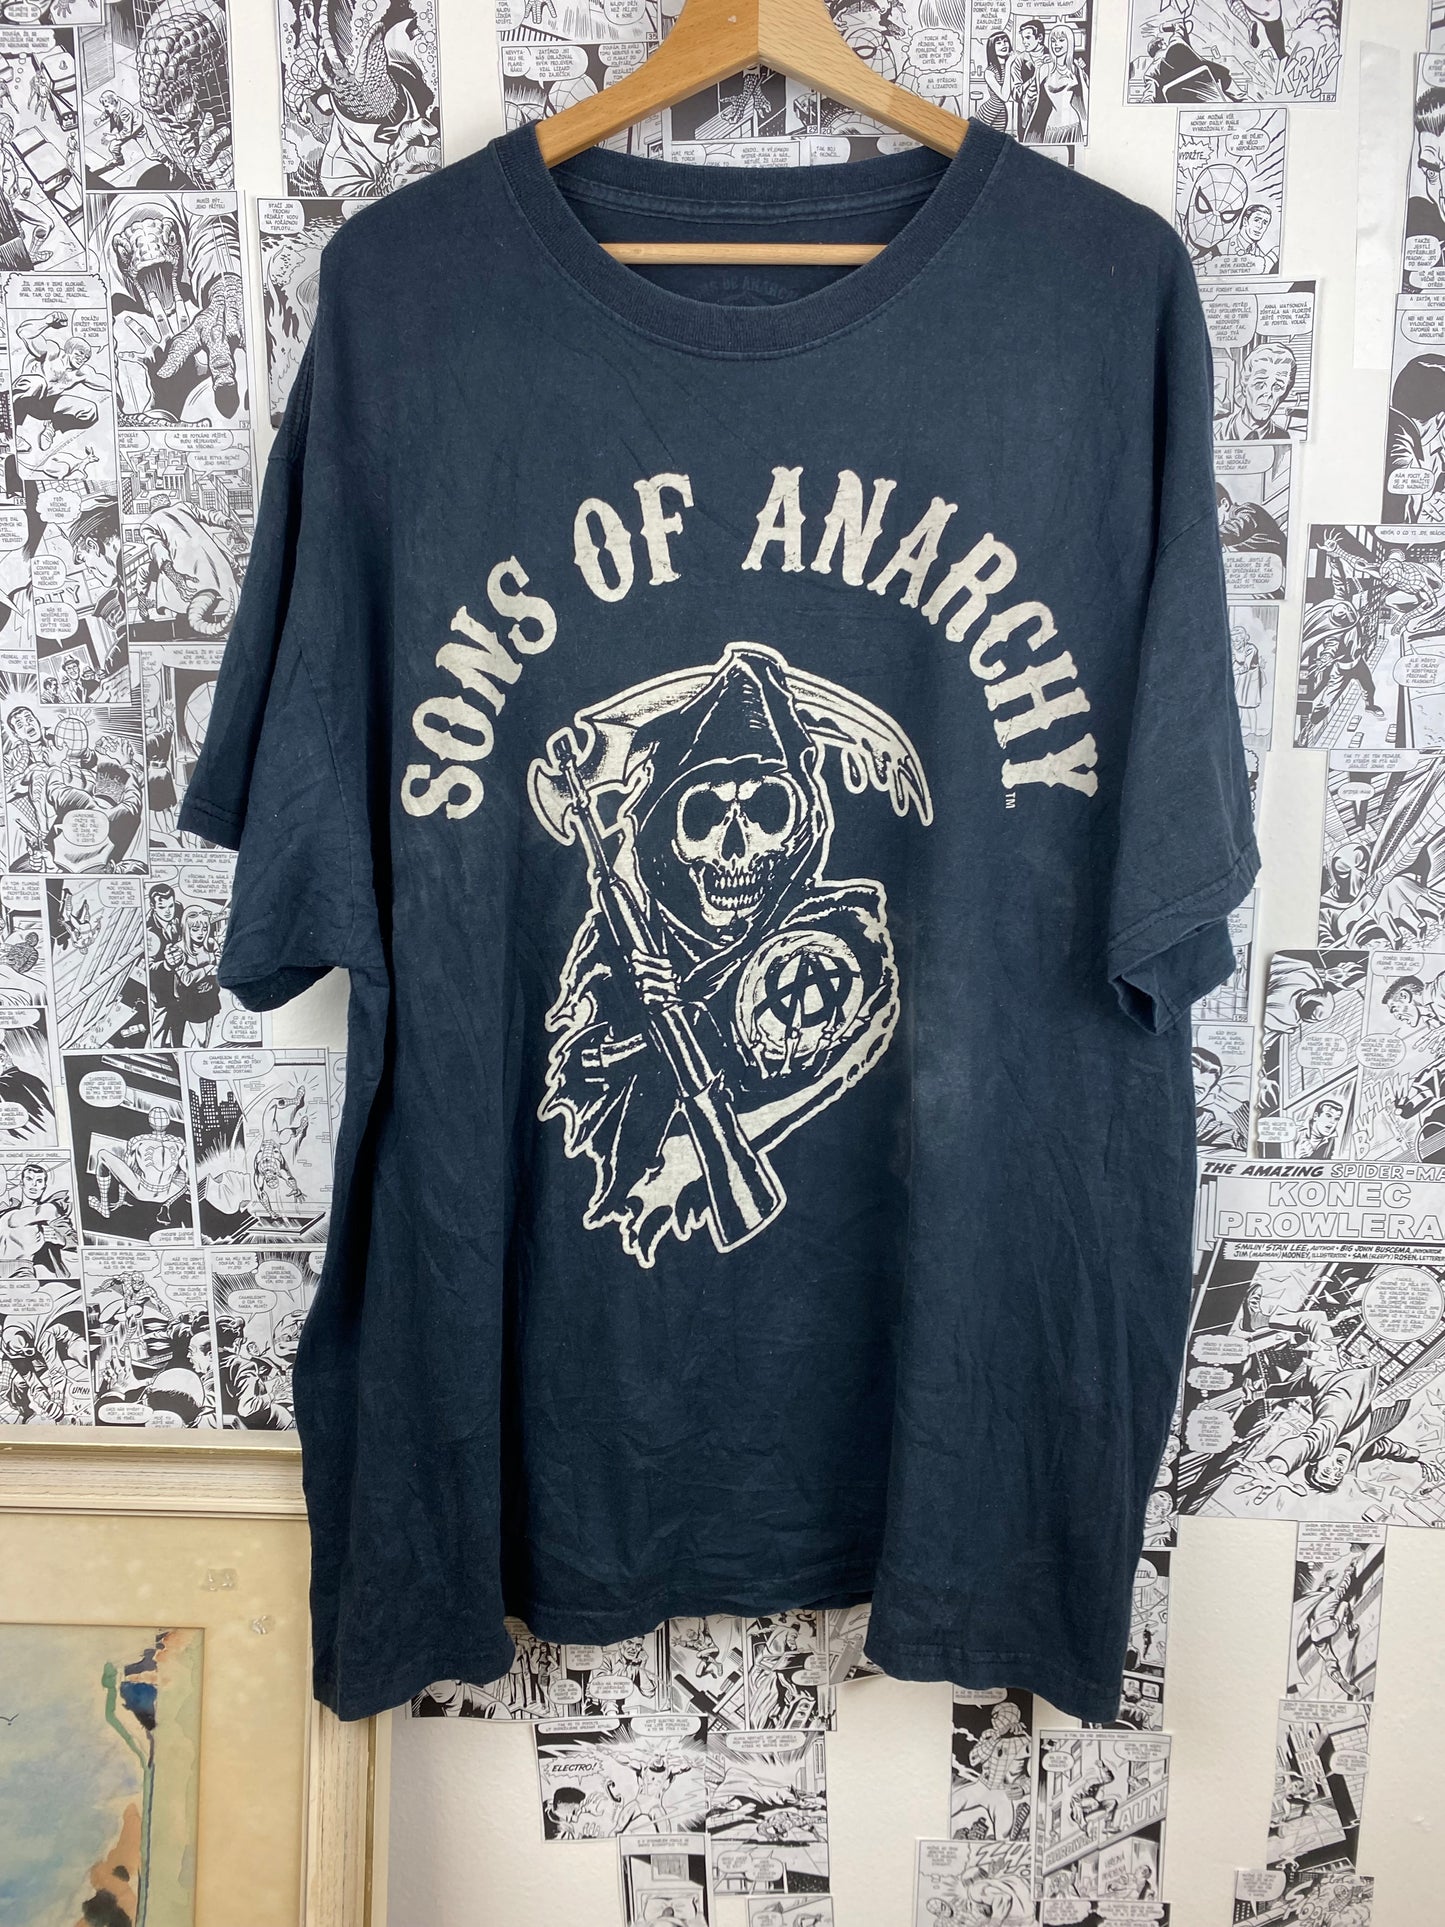 Sons of Anarchy t-shirt - size XXL